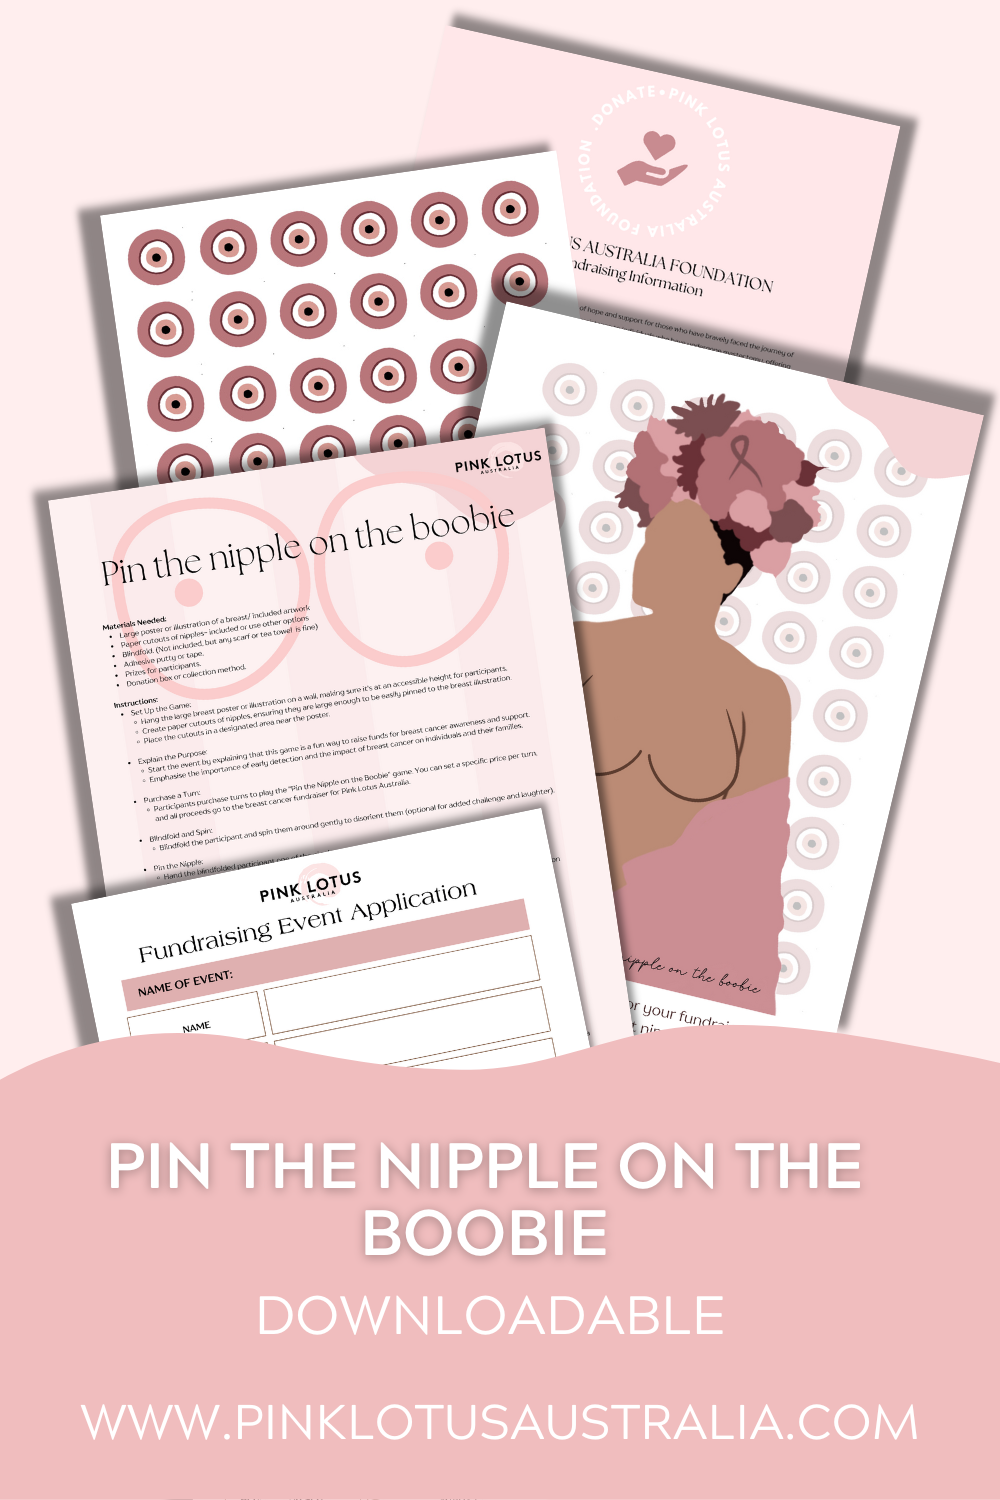 Downloadable- ‘Pin the Nipple on the Boobie’ FREE